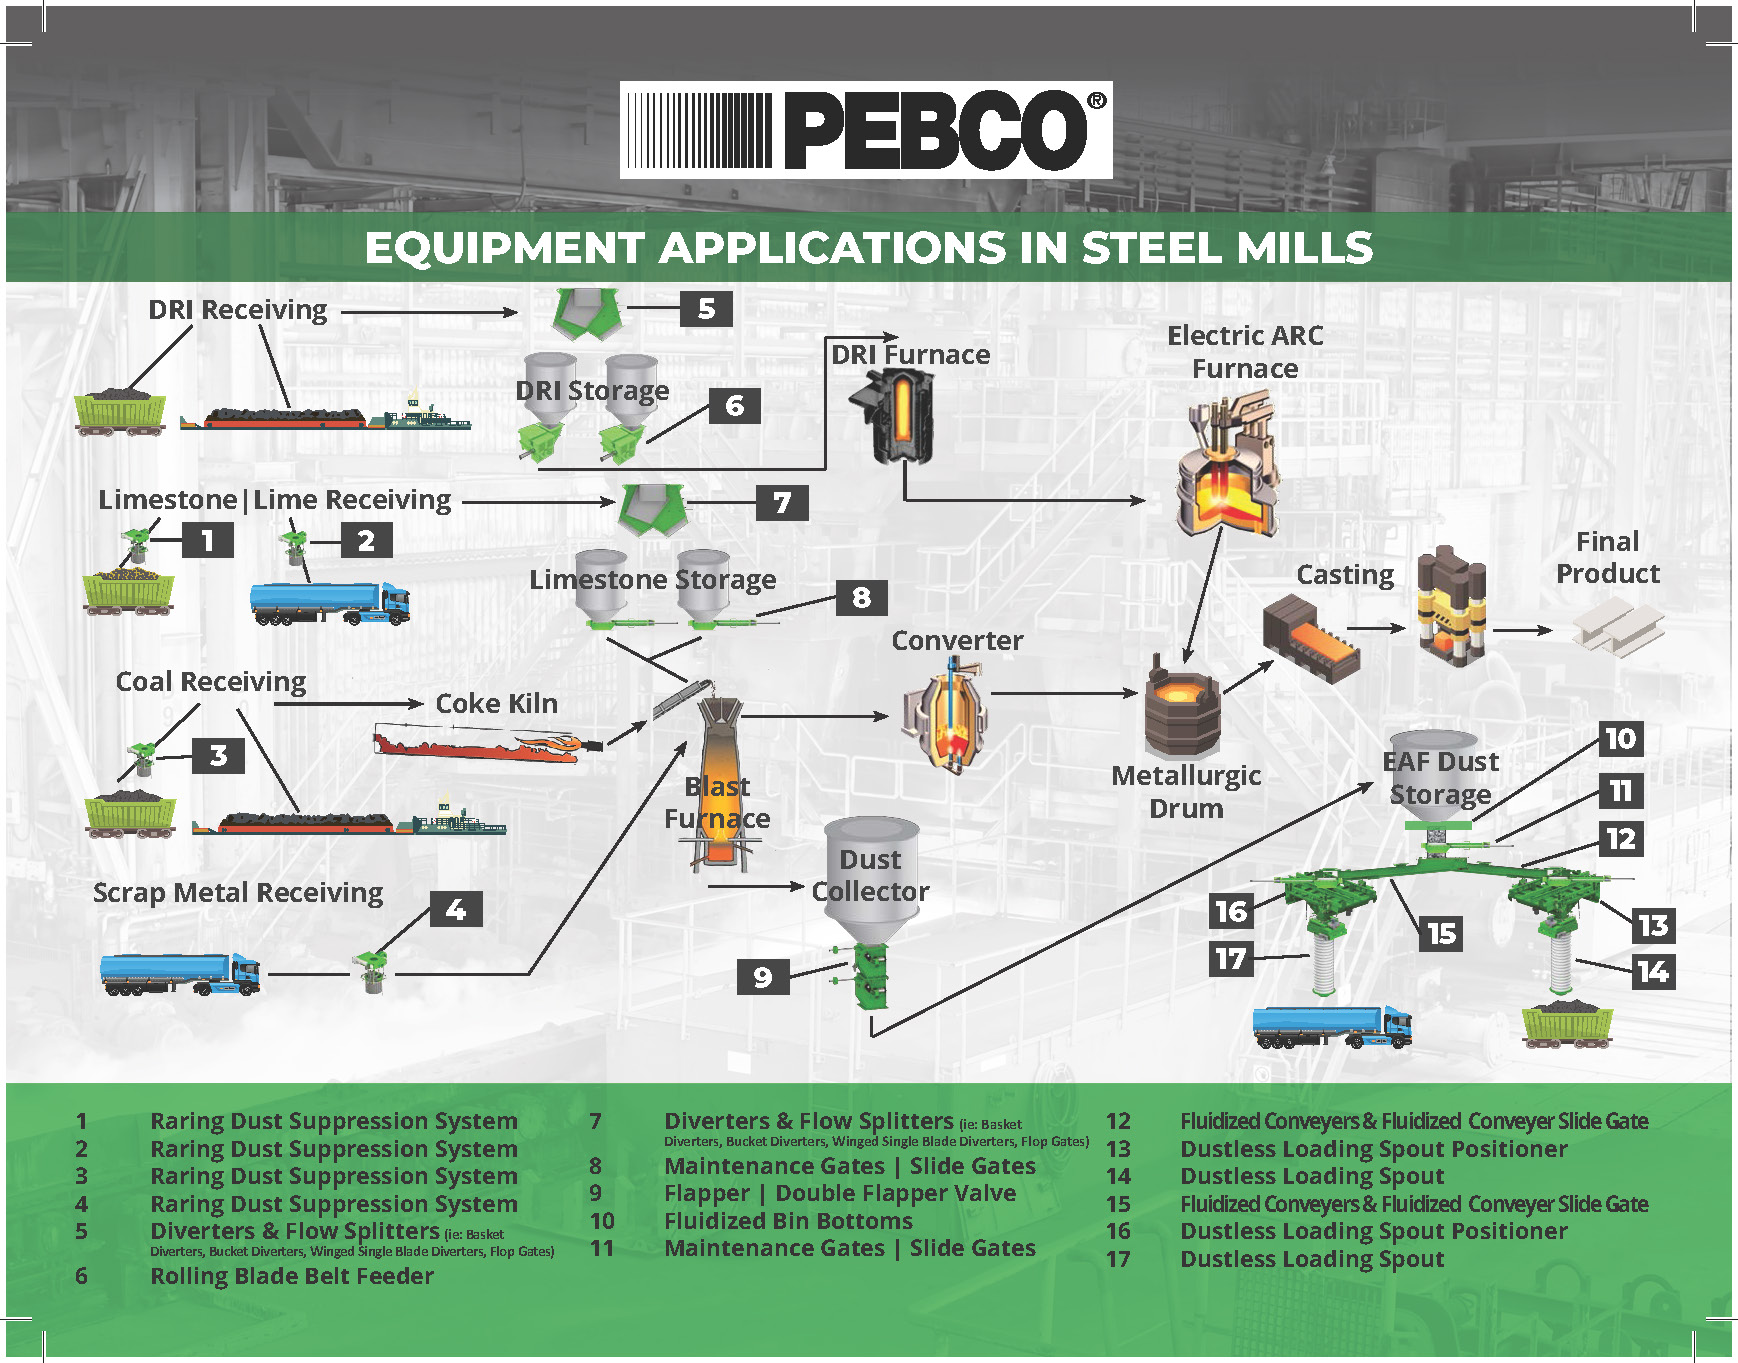 Steel mill equipment by PEBCO